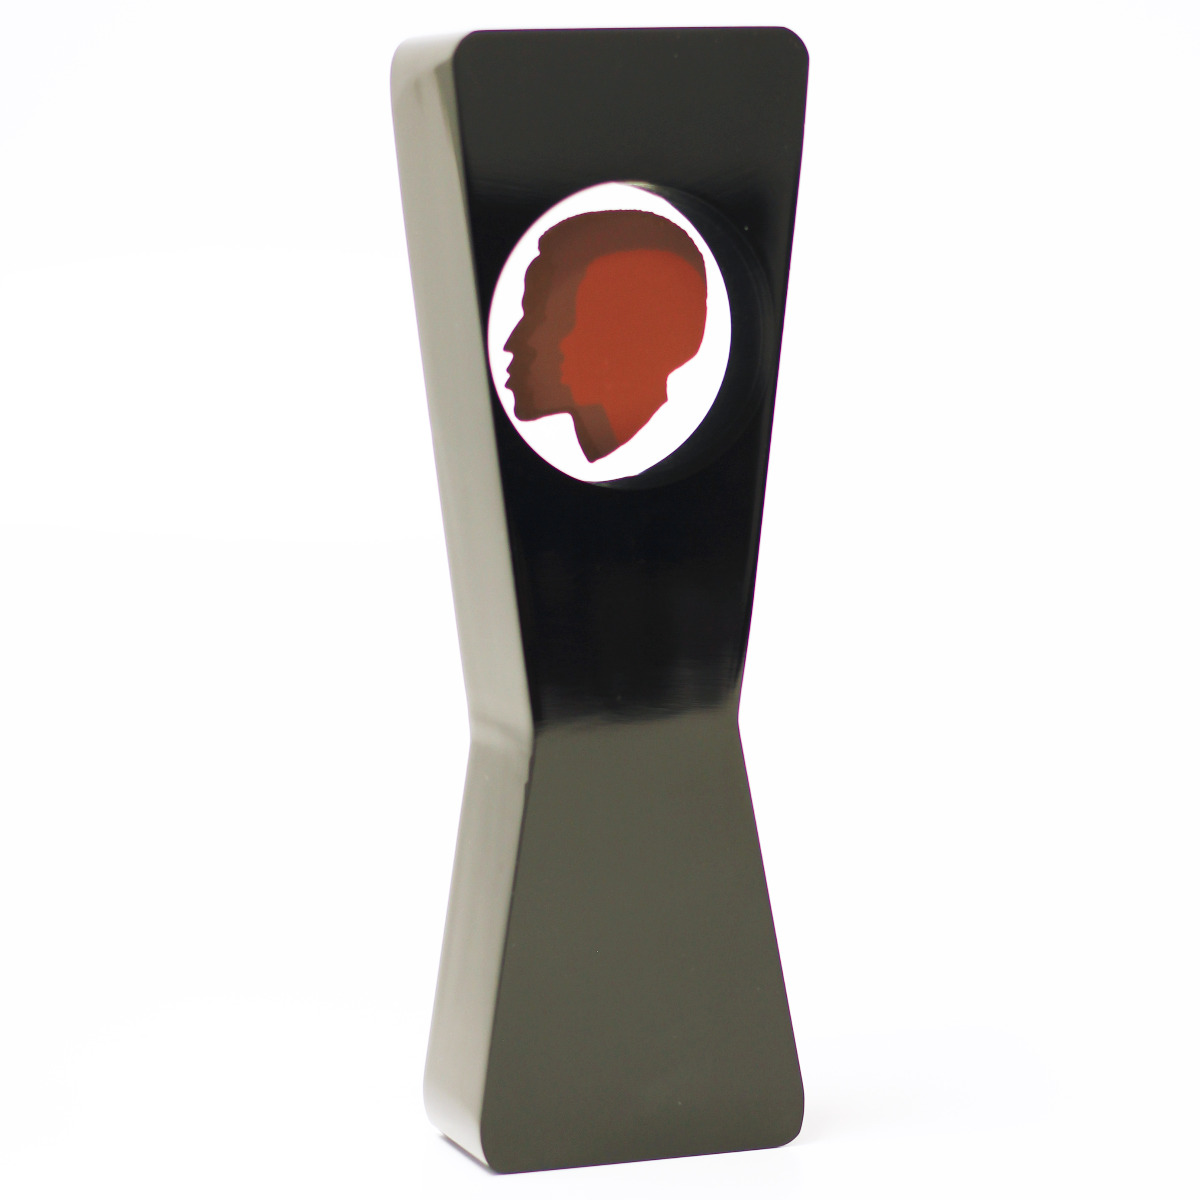 Custom shaped tall trophy with 2 faces